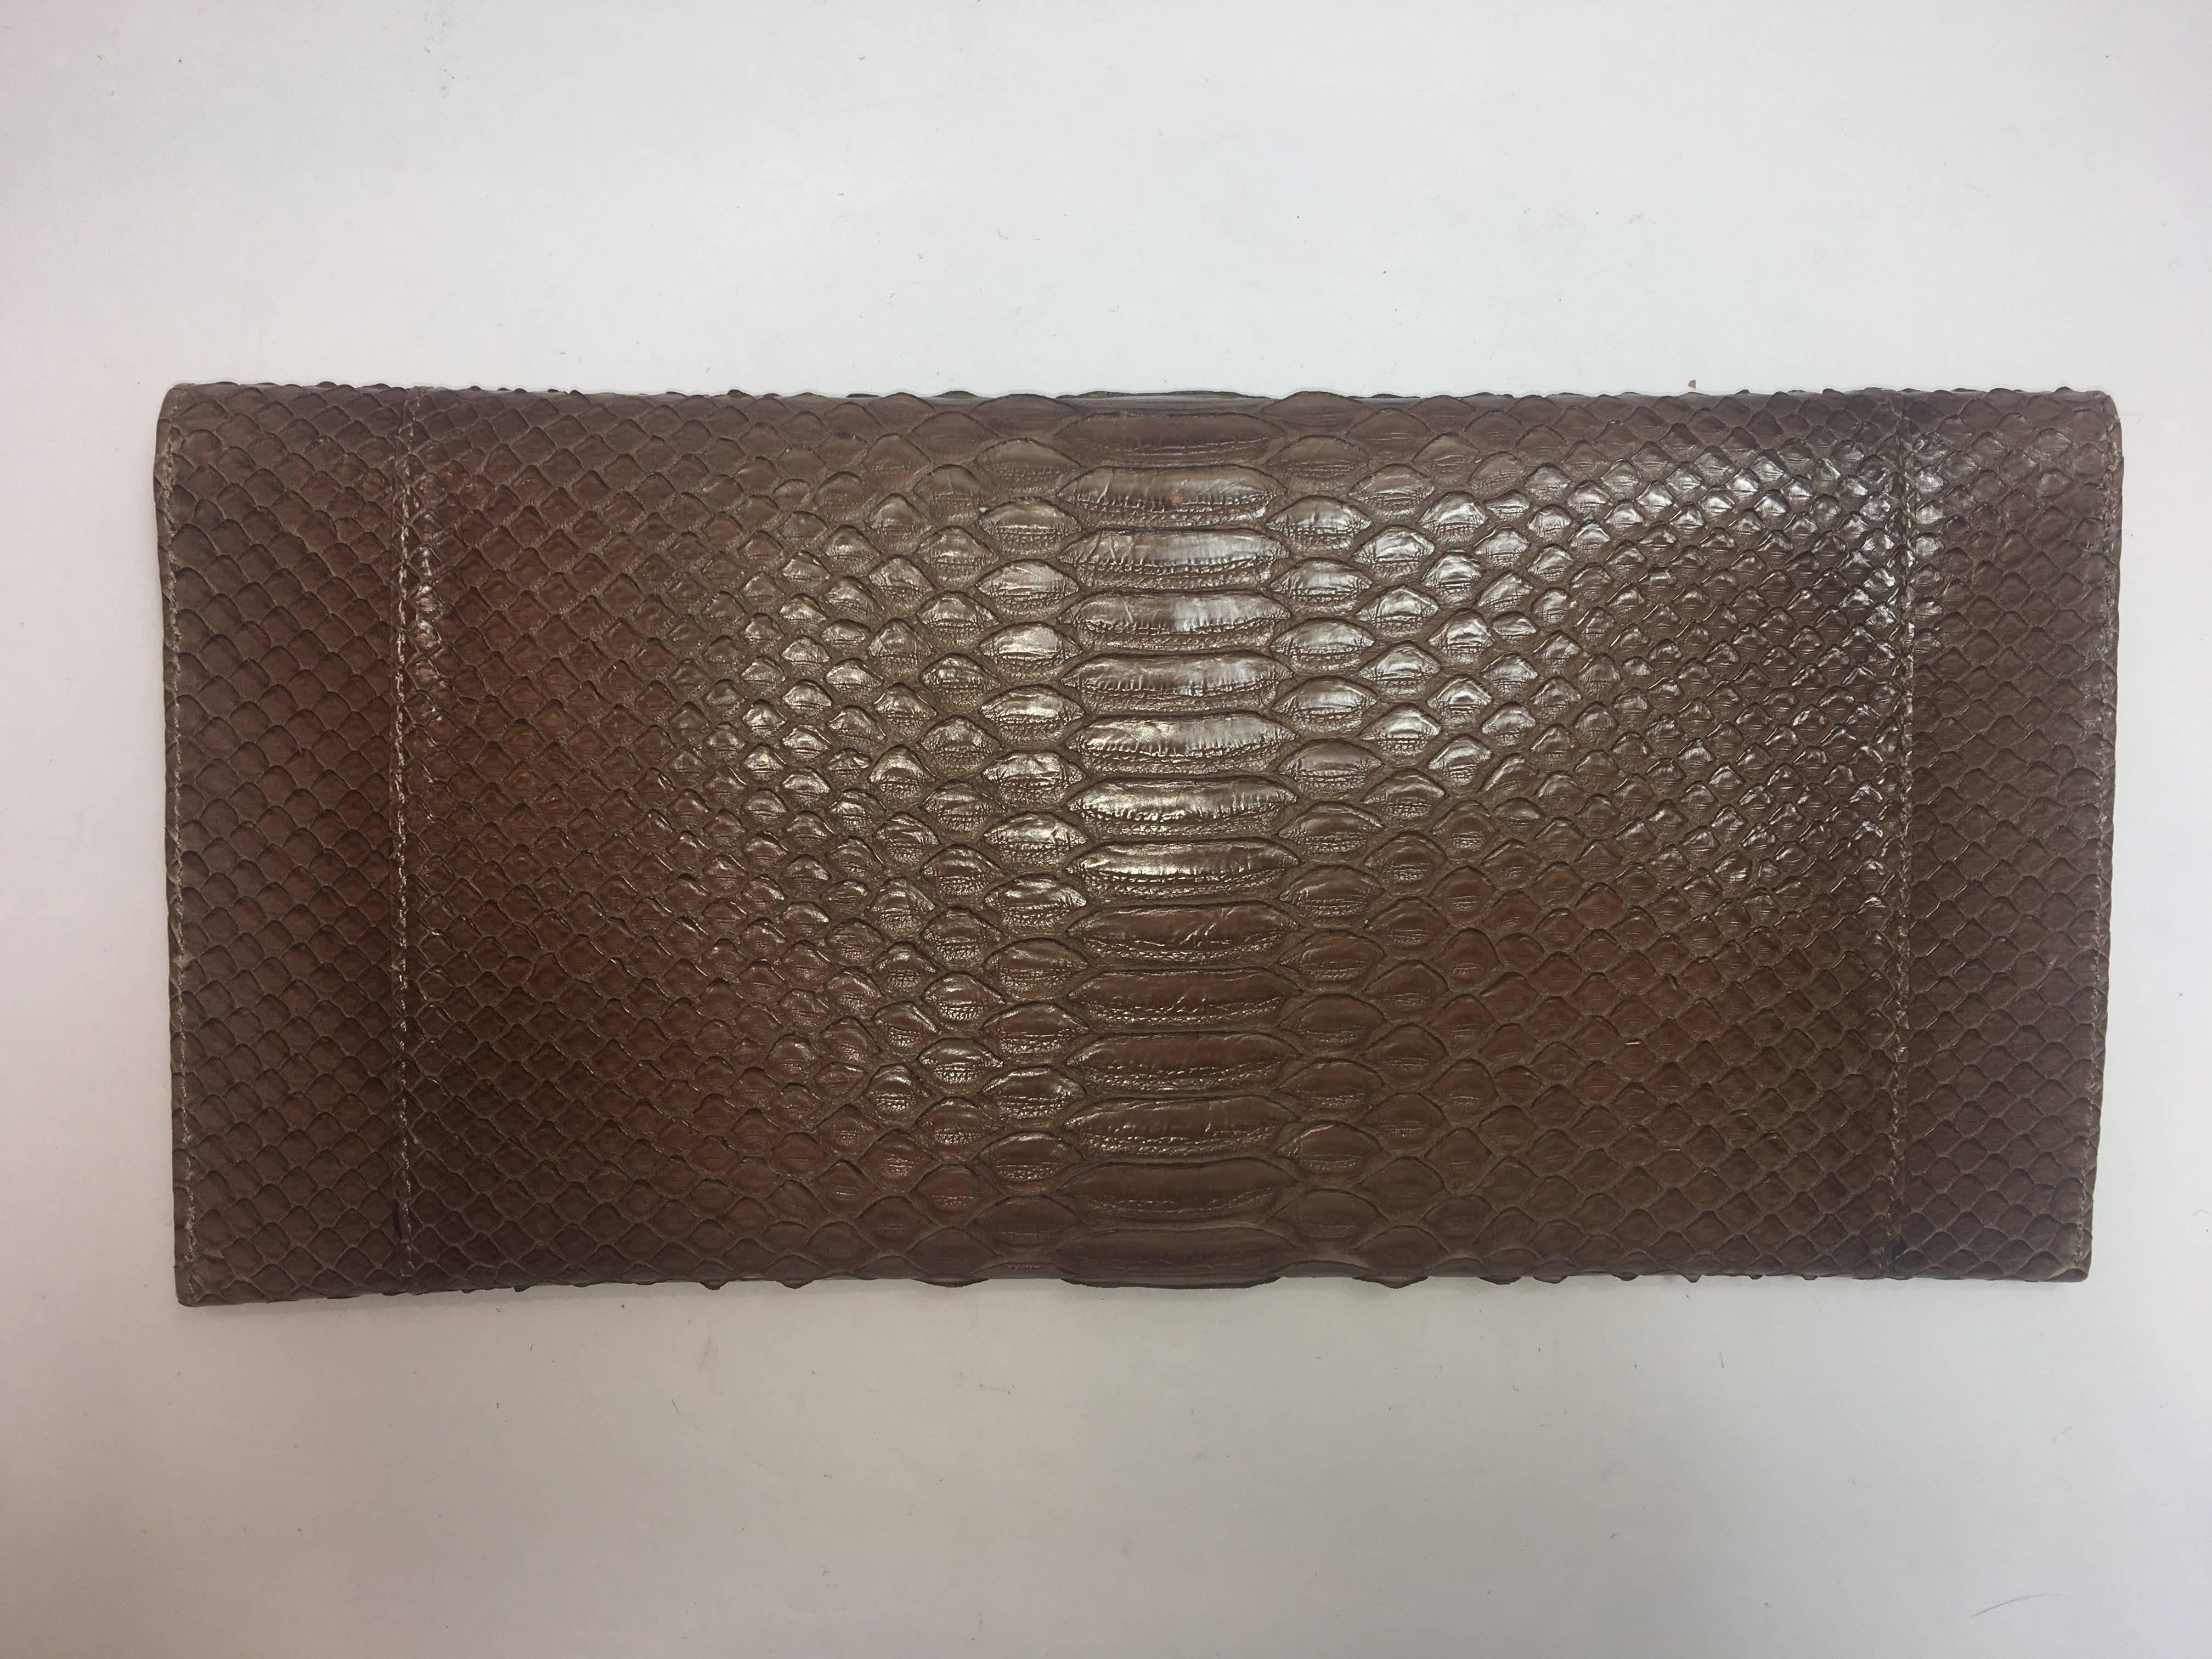 Carlos Falchi Brown Python Envelope Clutch with Magnetic Flap Closure and Gold Curb Link Chain Strap. 